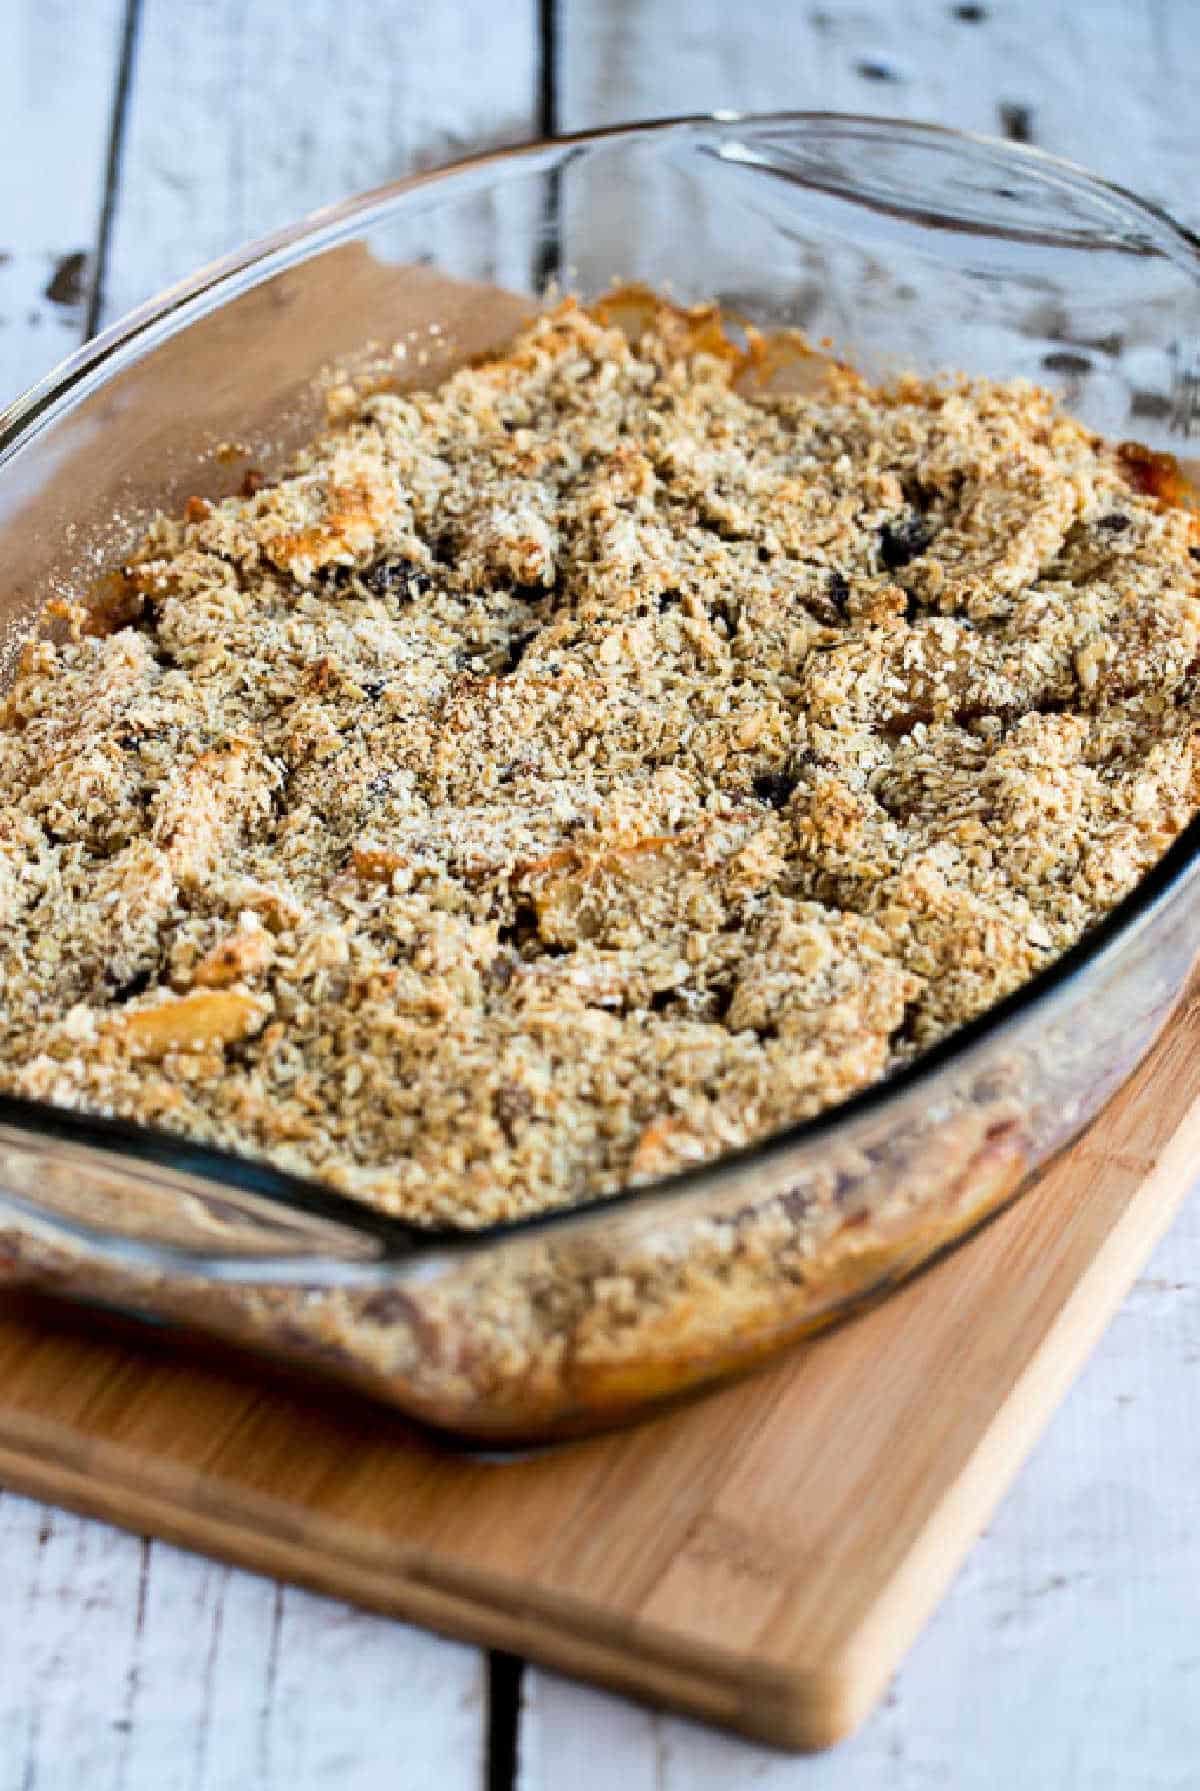 Cranberry Apple Crumble appears in a baking dish on a cutting board